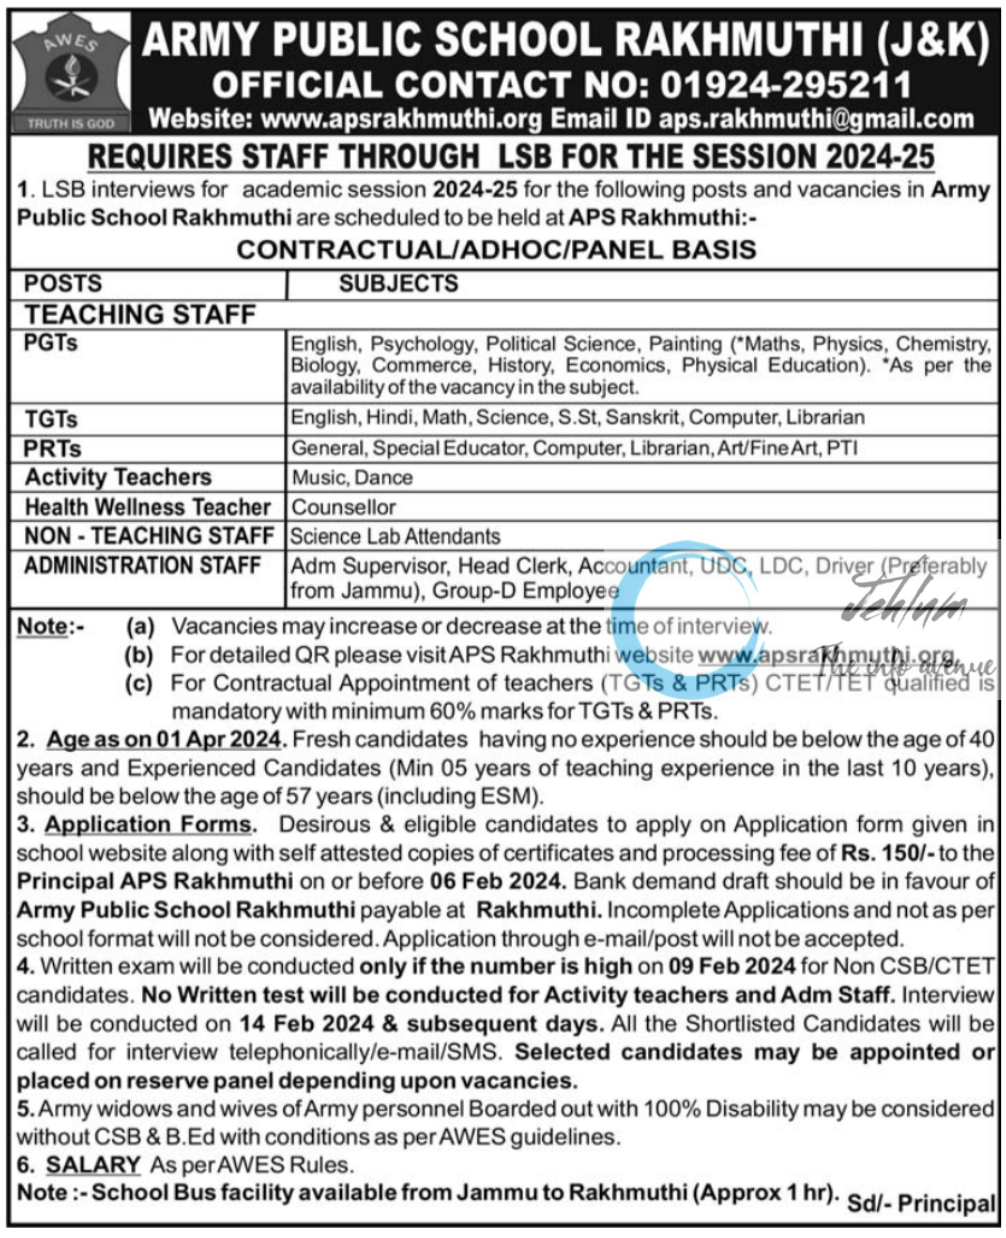 ARMY PUBLIC SCHOOL RAKHMUTHI REQUIRES STAFF THROUGH LSB FOR THE SESSION 2024-25